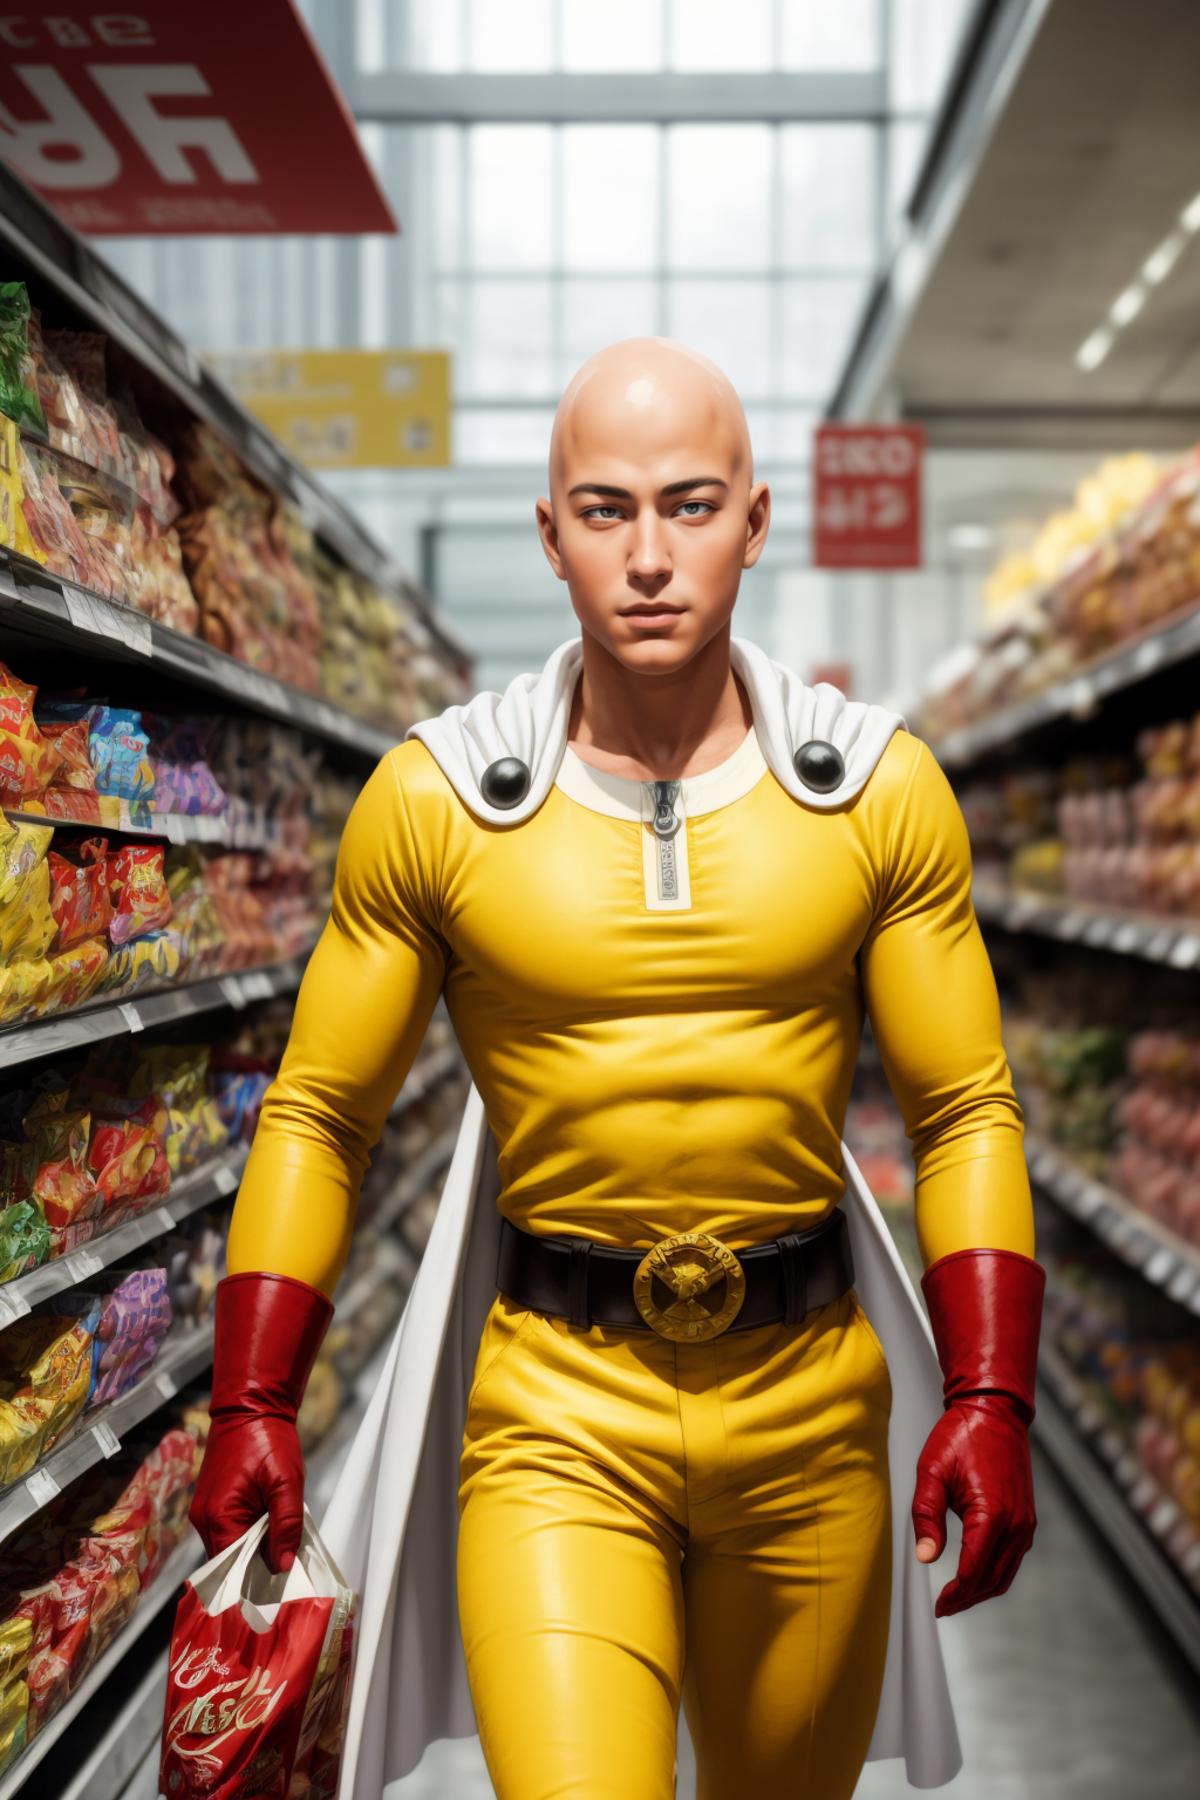 A man dressed as a superhero, specifically the character Mighty Morphin Power Ranger, walking down an aisle in a grocery store.